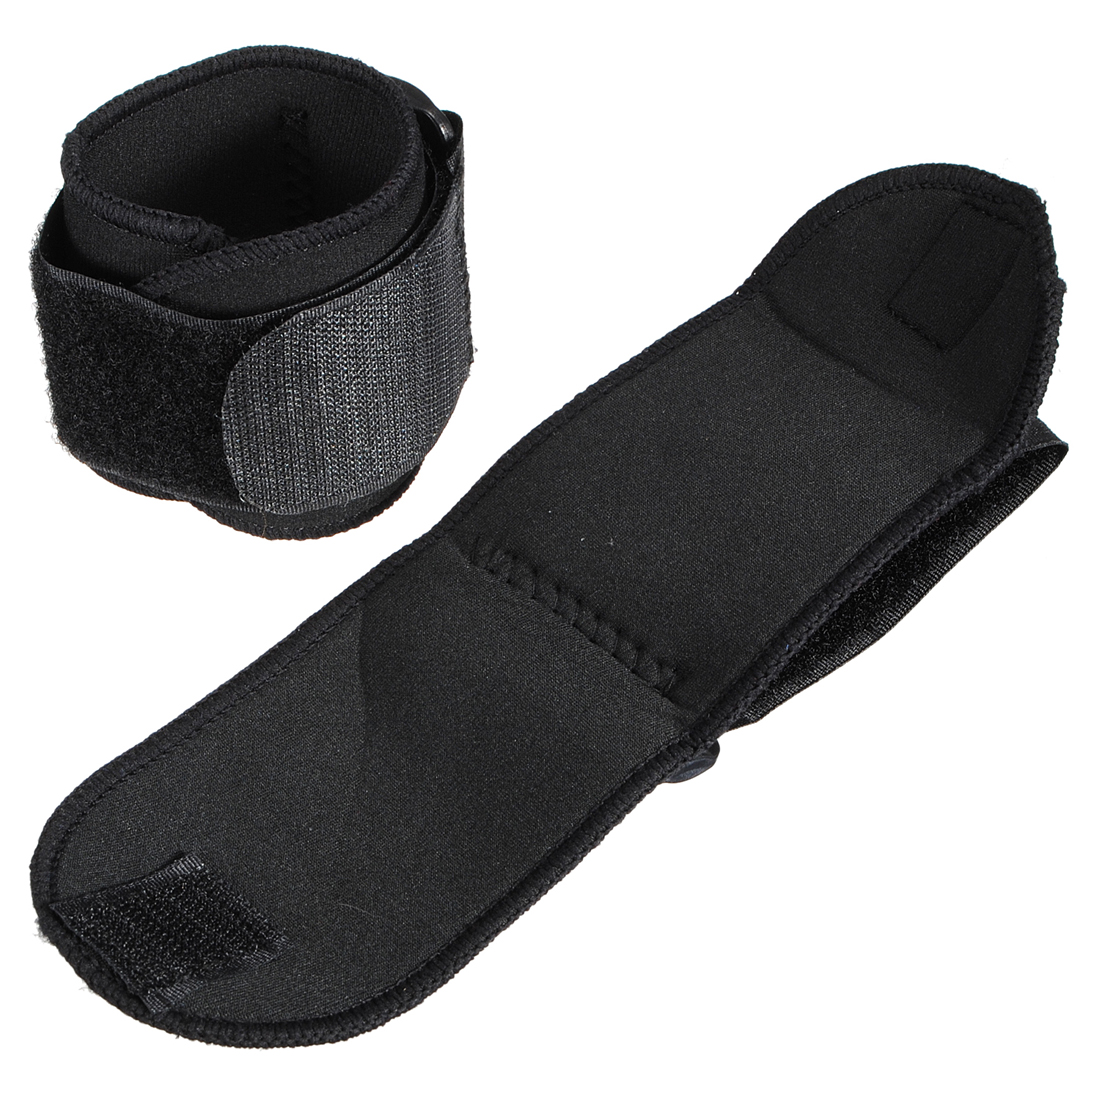 A Pair Of Sports Wristbands Wrist Supporter Wrap Hand Straps - US$2.77 ...